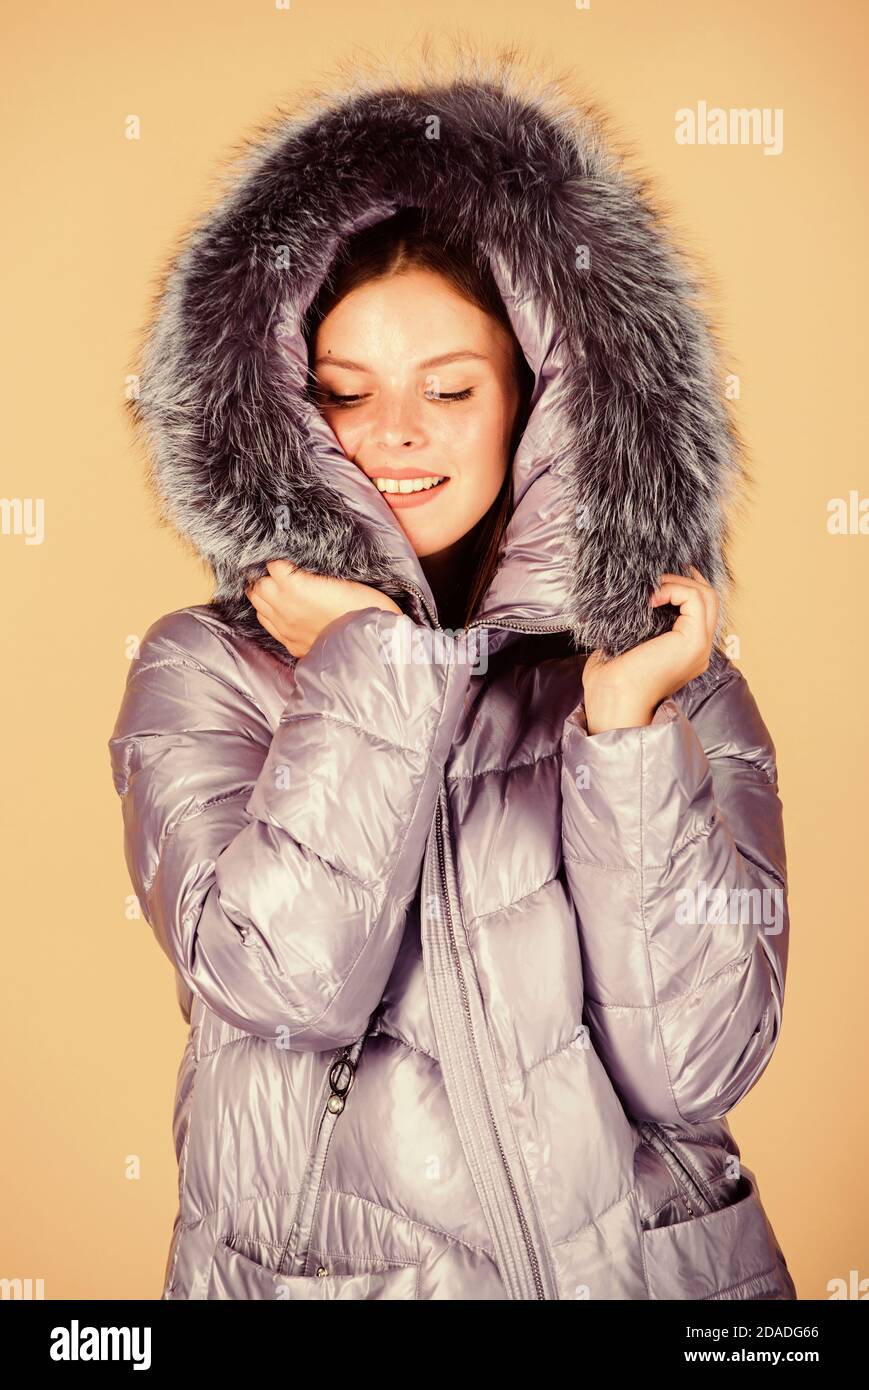 Faux fur. Fashion girl winter clothes. Fashion trend. Fashion coat and hat.  Warming up. Casual winter jacket slightly more stylish and have more  comfort features such as larger hood fur trim on